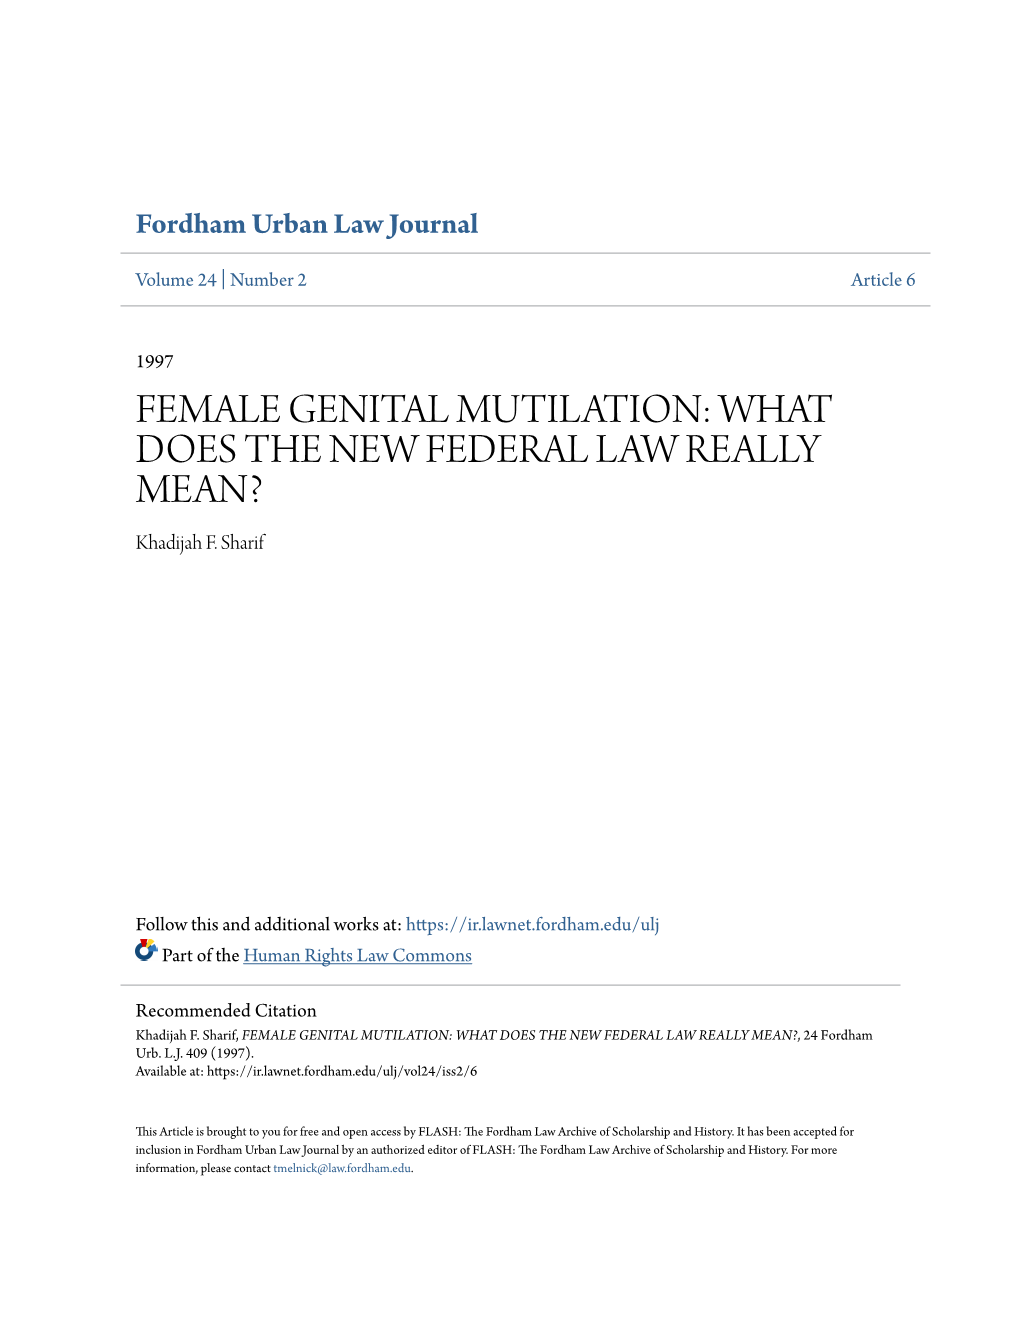 FEMALE GENITAL MUTILATION: WHAT DOES the NEW FEDERAL LAW REALLY MEAN? Khadijah F